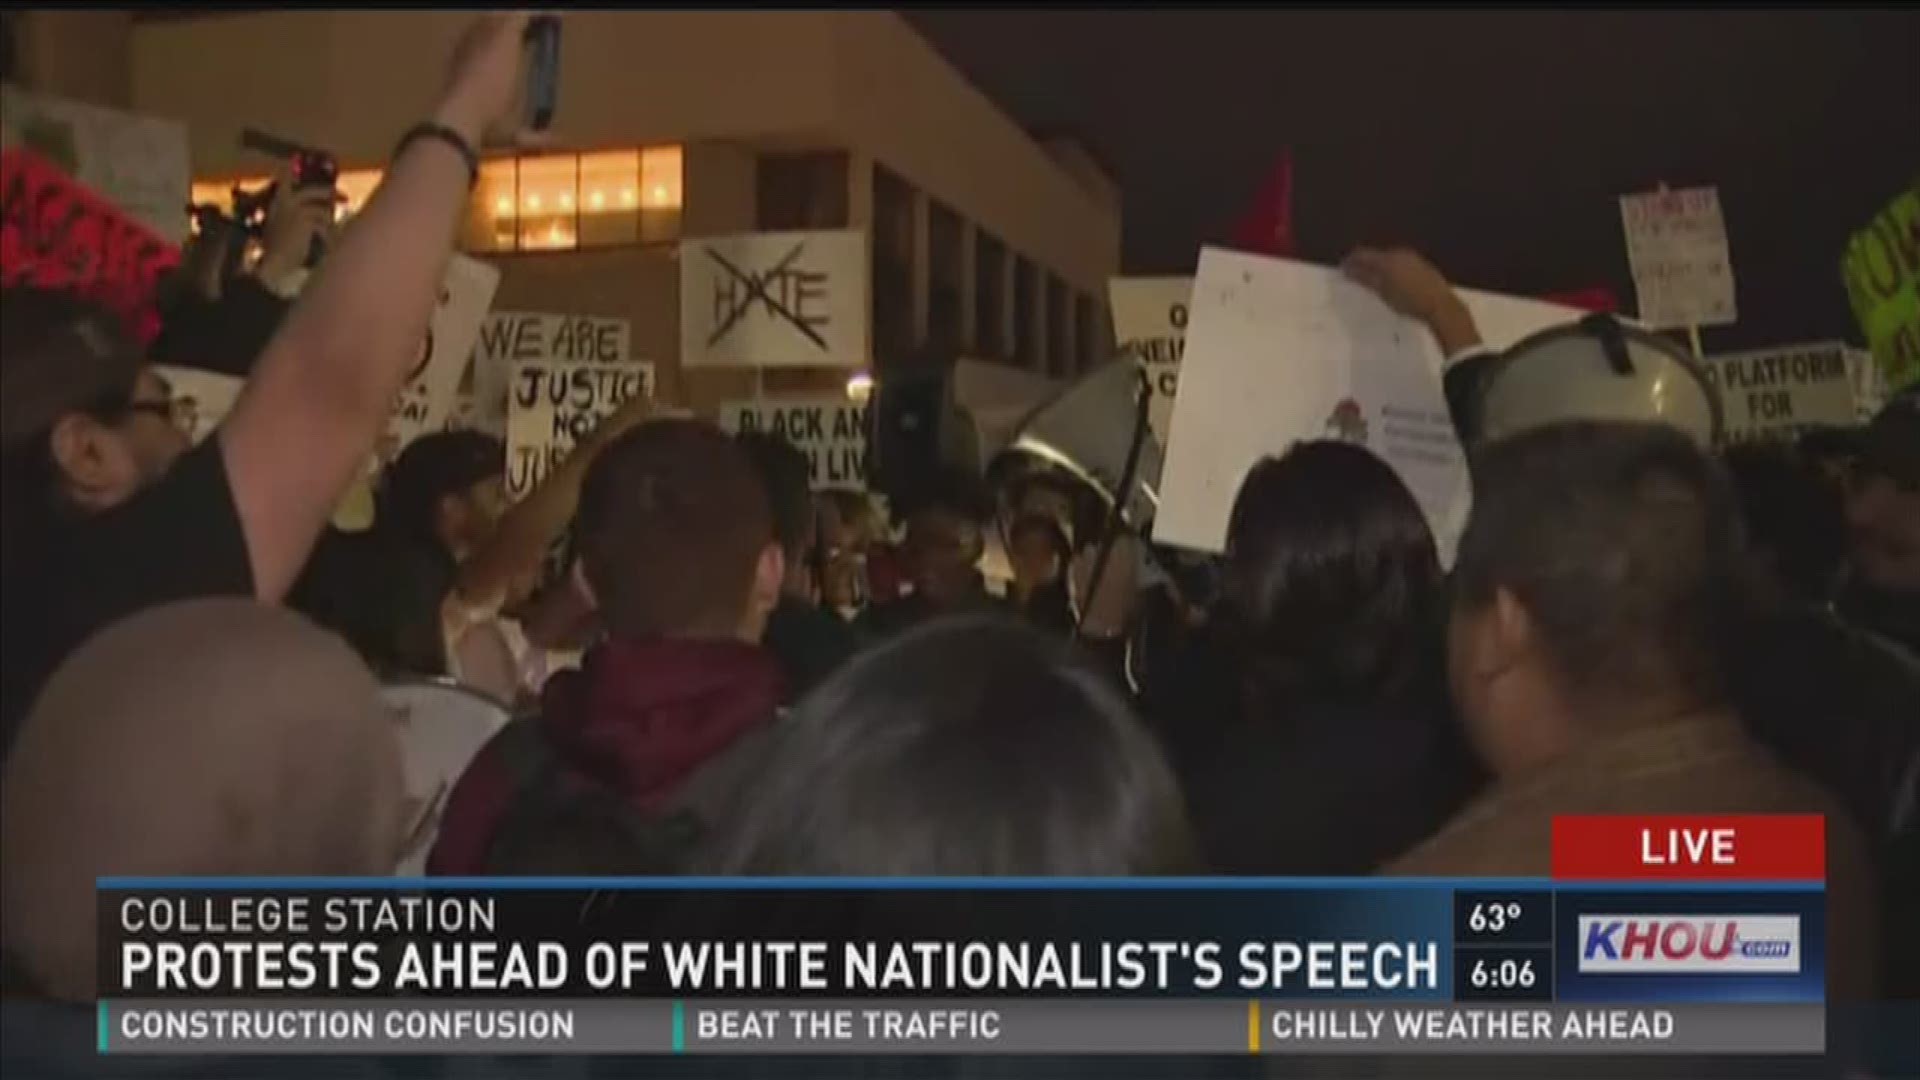 Protesters at Texas A&M University are speaking out against an alt-right leader set to speak on campus.